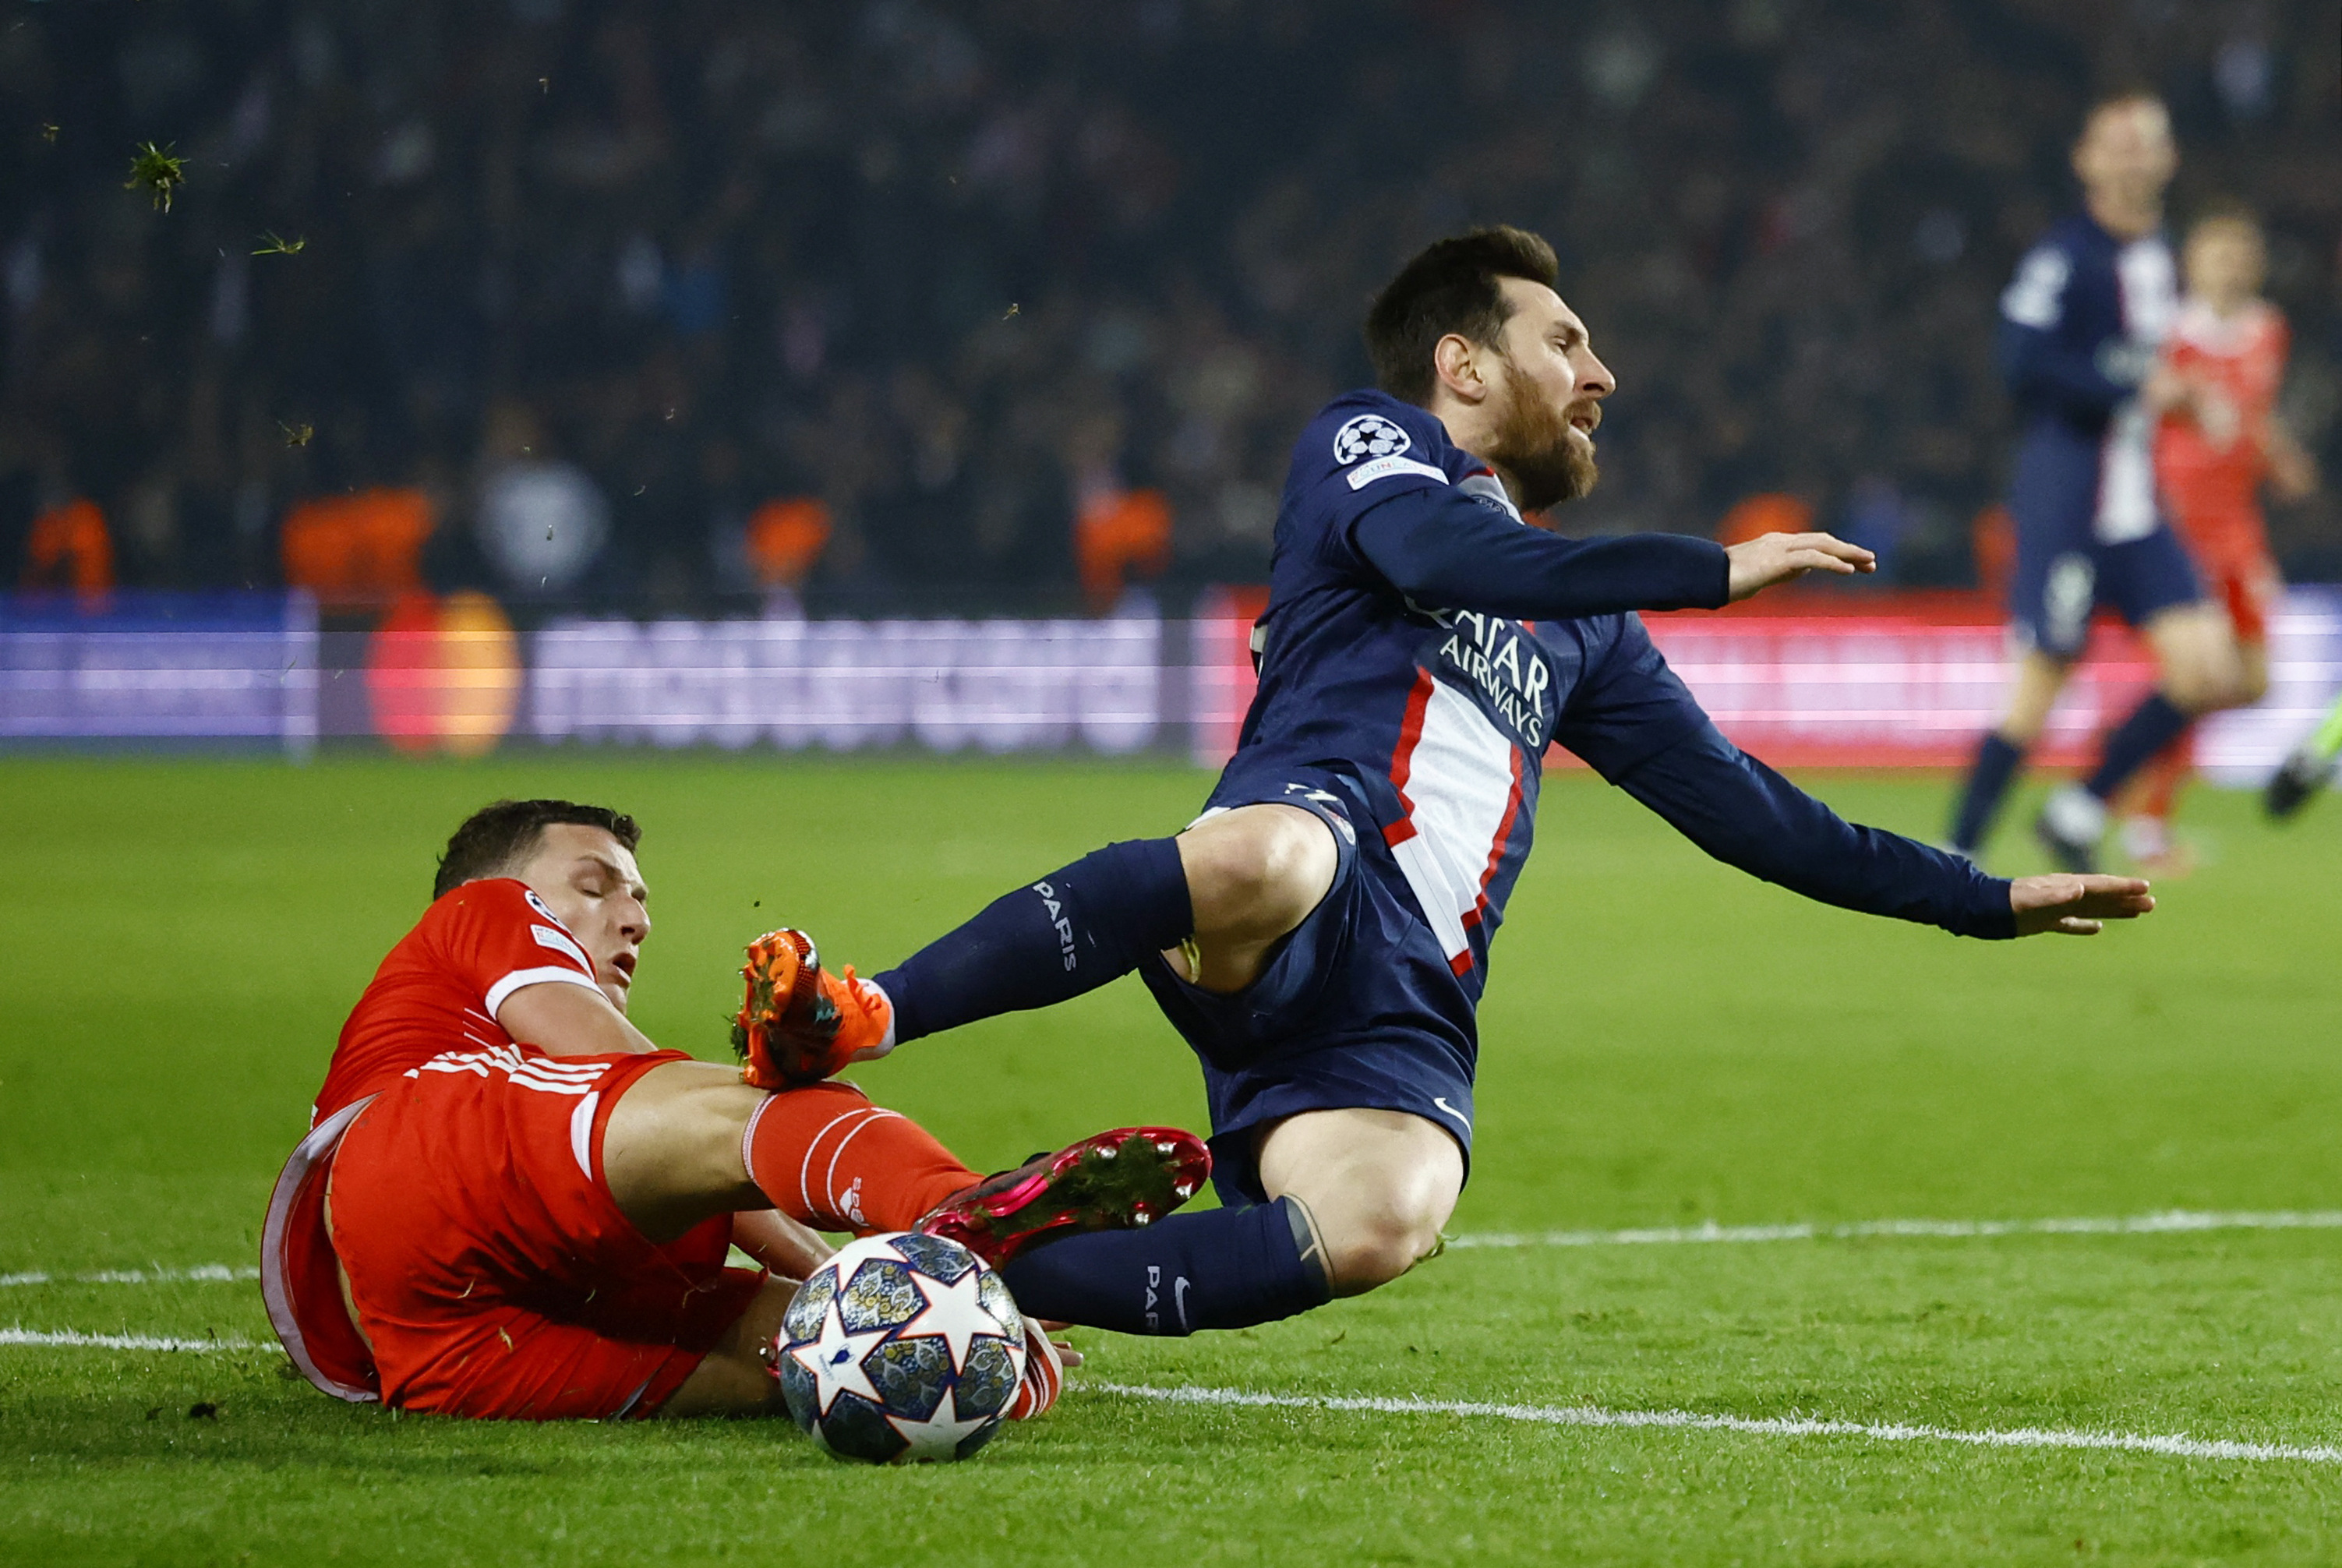 Soccer Football - Champions League - Round of 16 First Leg - Paris St Germain v Bayern Munich - Parc des Princes, Paris, France - February 14, 2023  Bayern Munich's Benjamin Pavard fouls Paris St Germain's Lionel Messi leading to a second yellow card and being sent off REUTERS/Sarah Meyssonnier